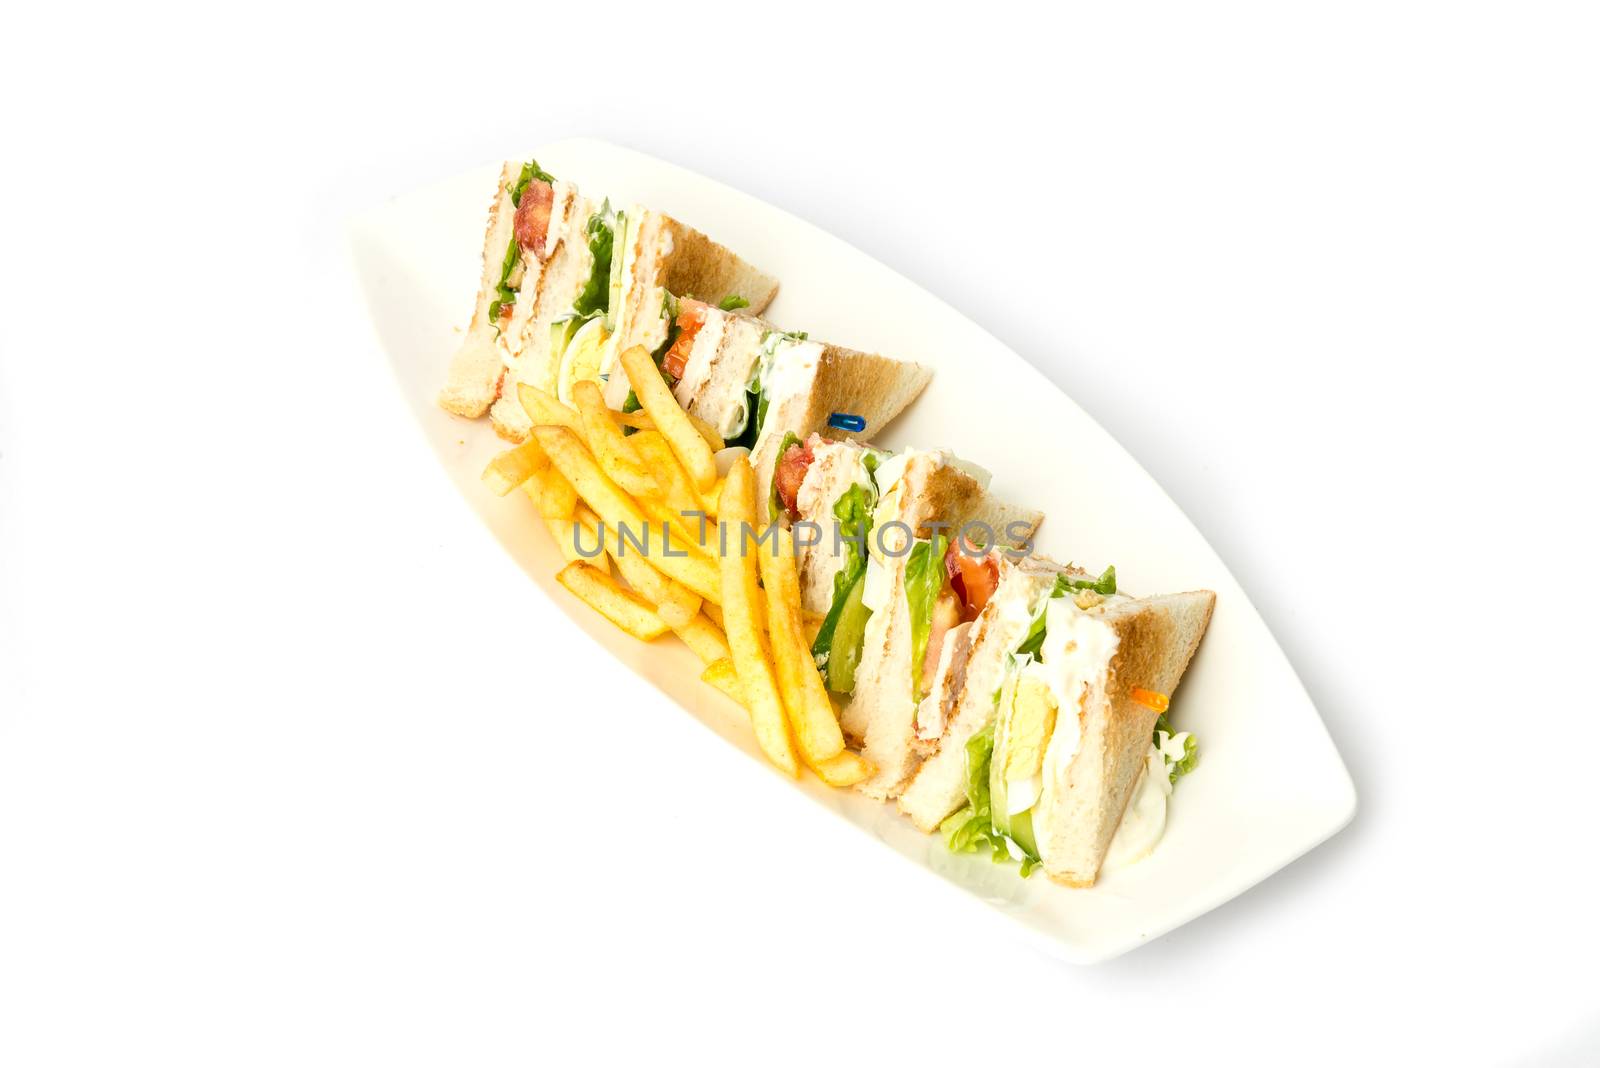 Club Sandwich with Cheese, Pickled Cucumber, Tomato and Smoked Meat. Garnished with French Fries